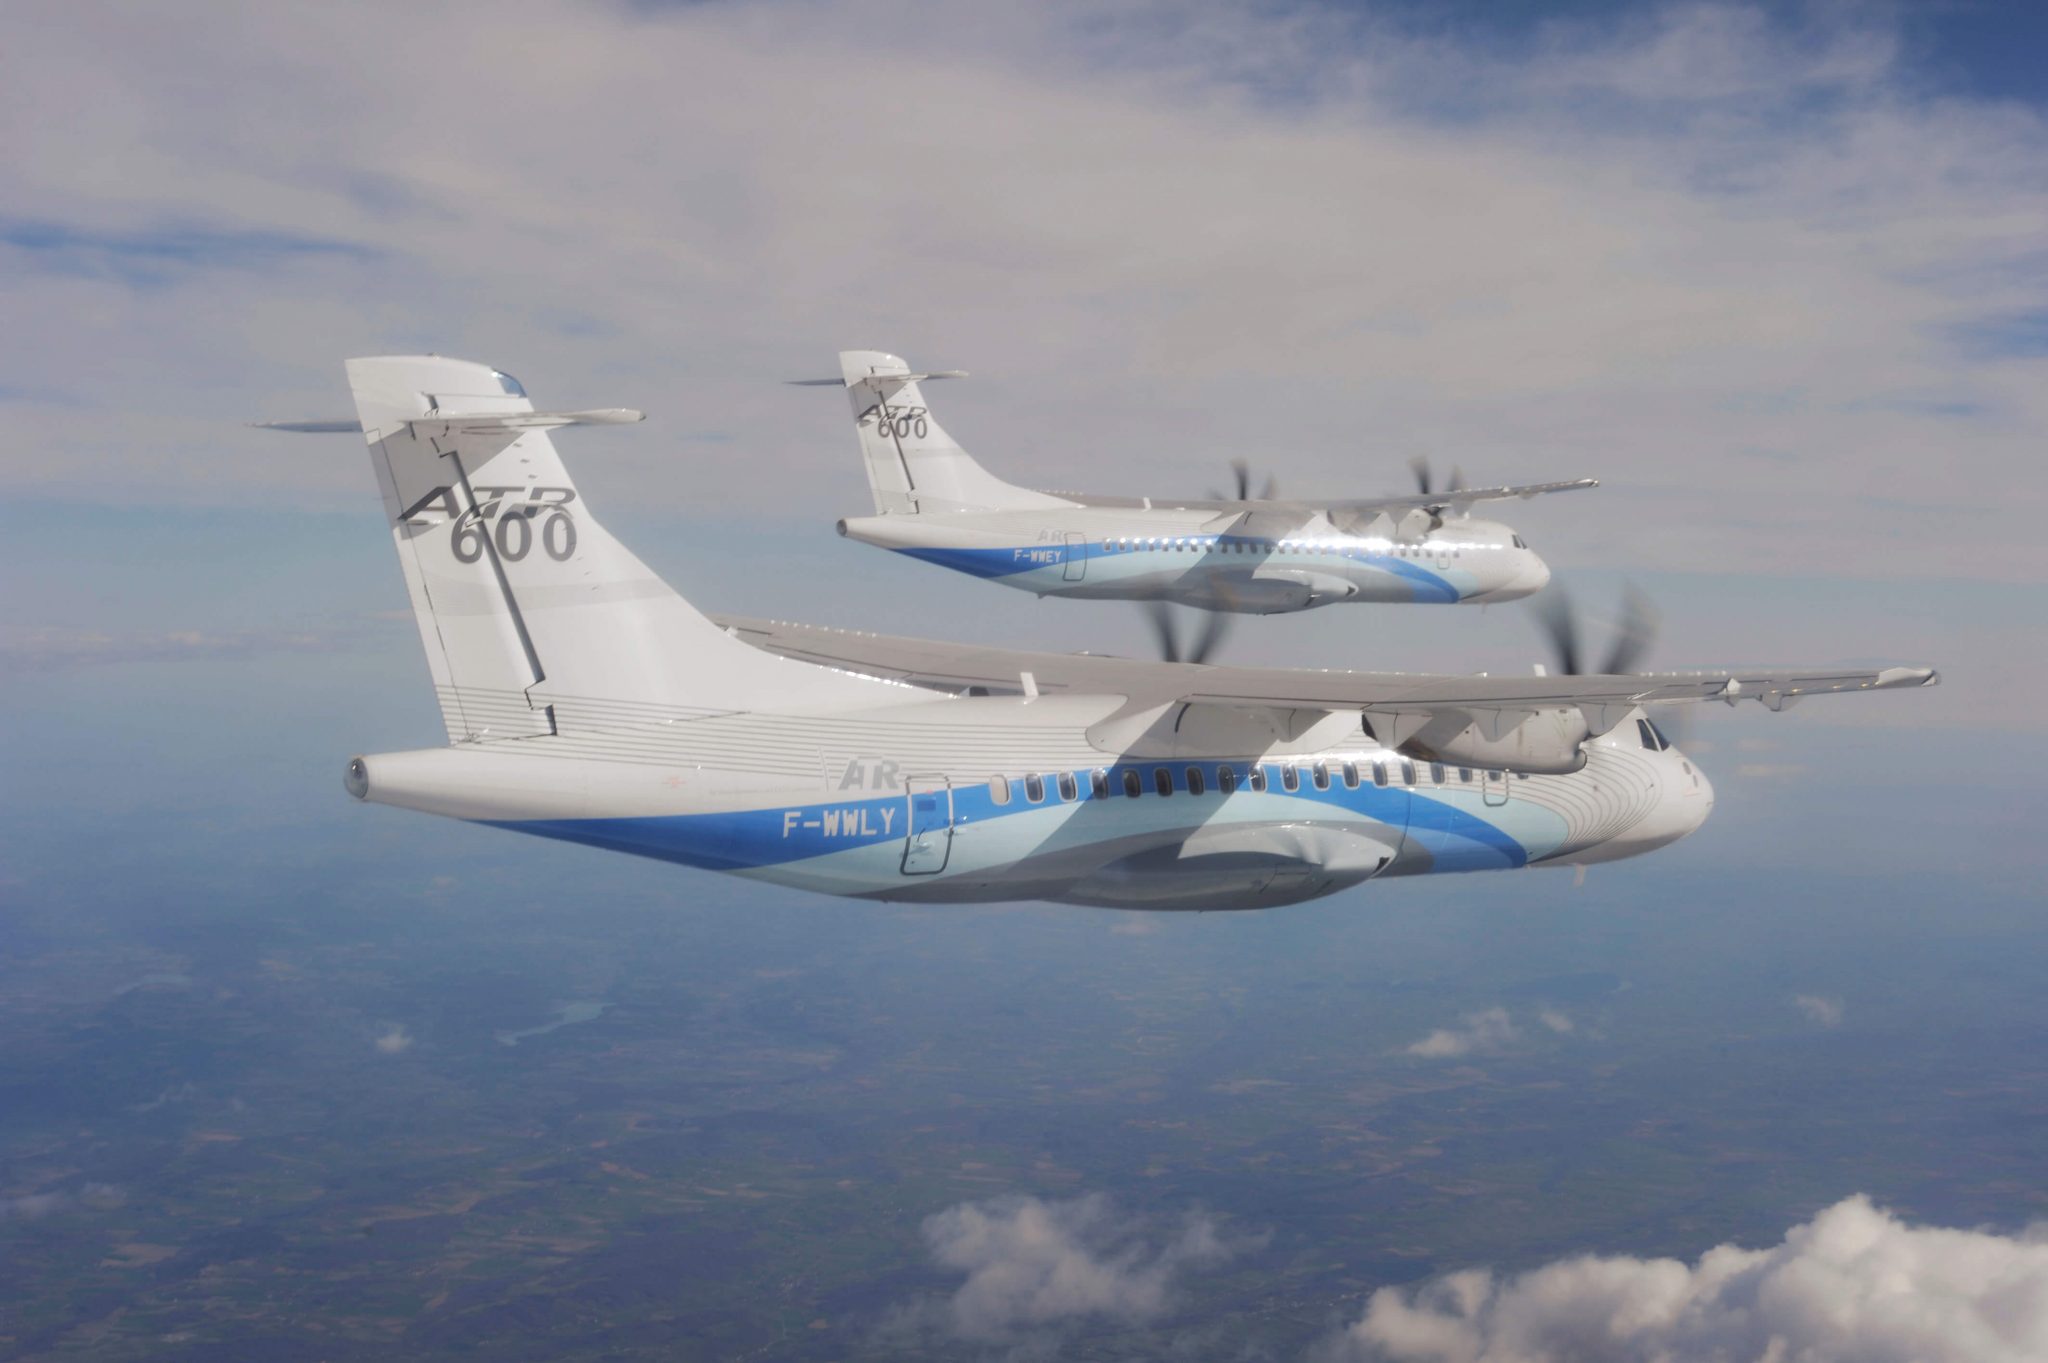 ATR predicts upward trend and solid market appeal for latest ATR models